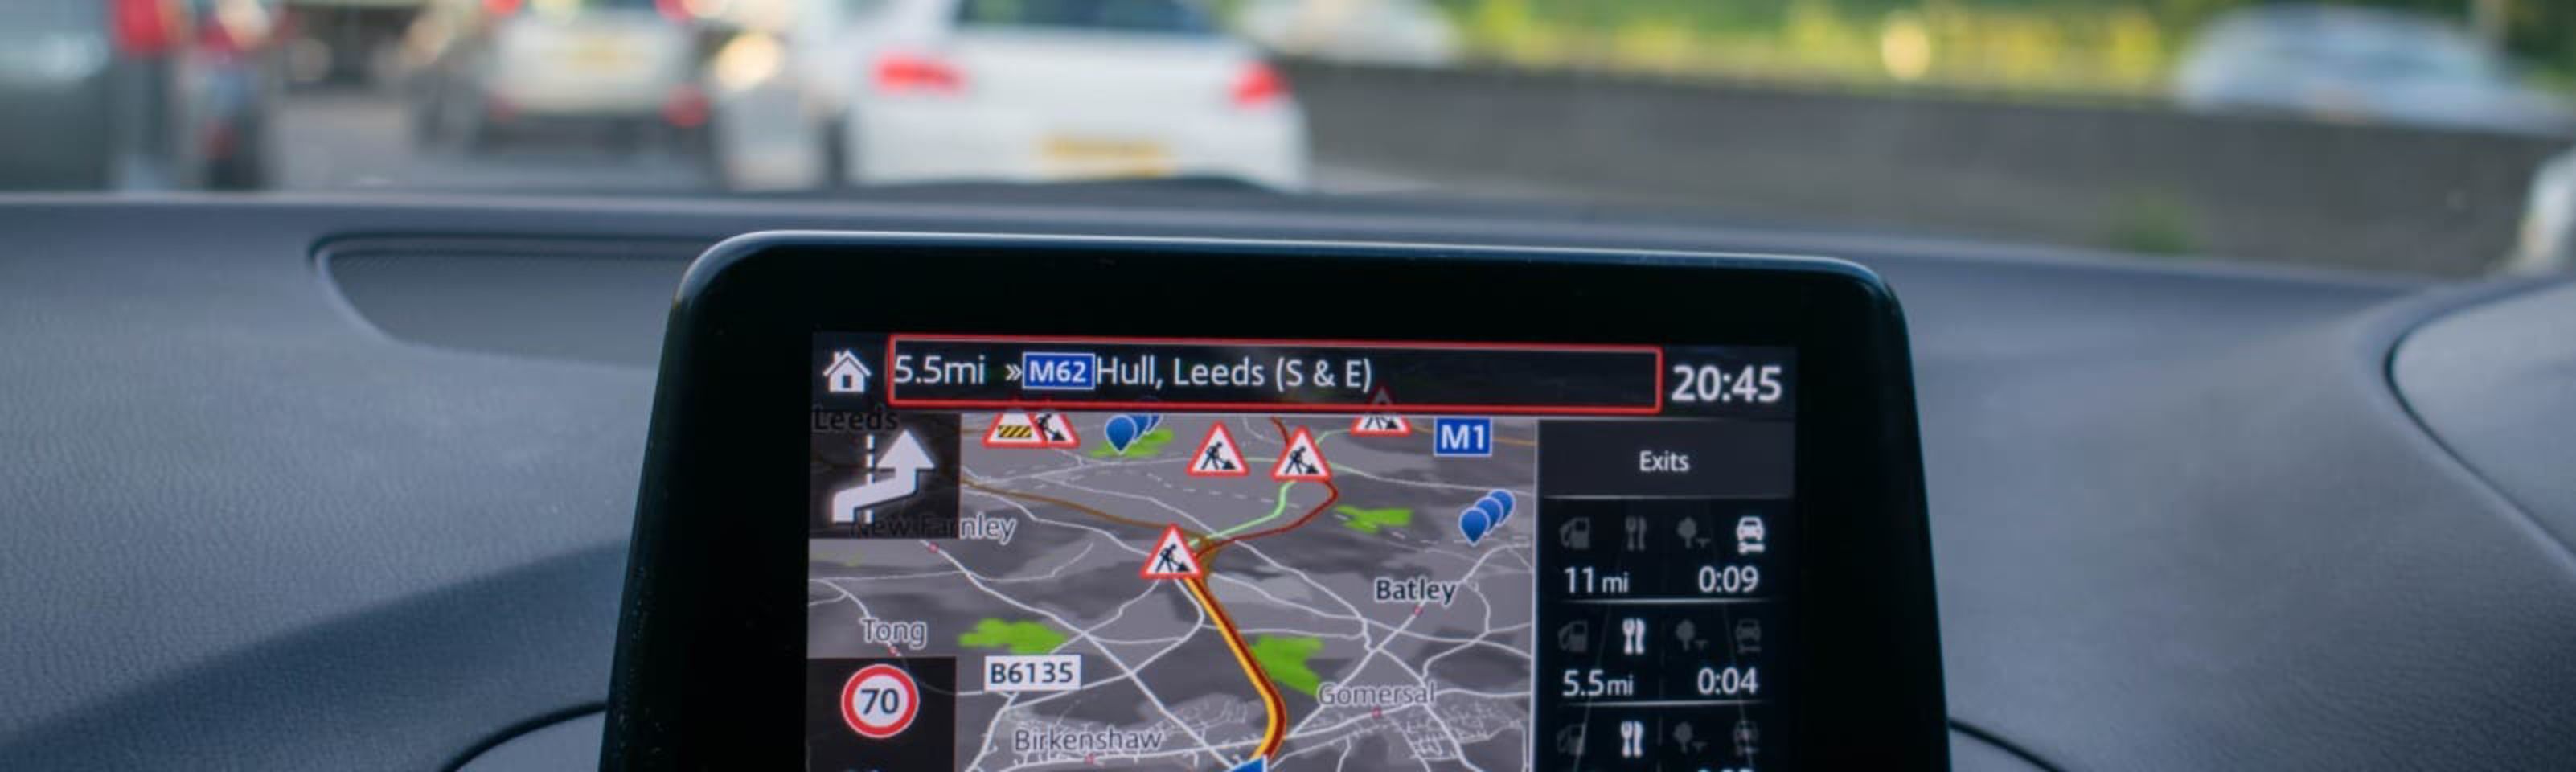 Top tips on saving yourself from a sat nav disaster this season